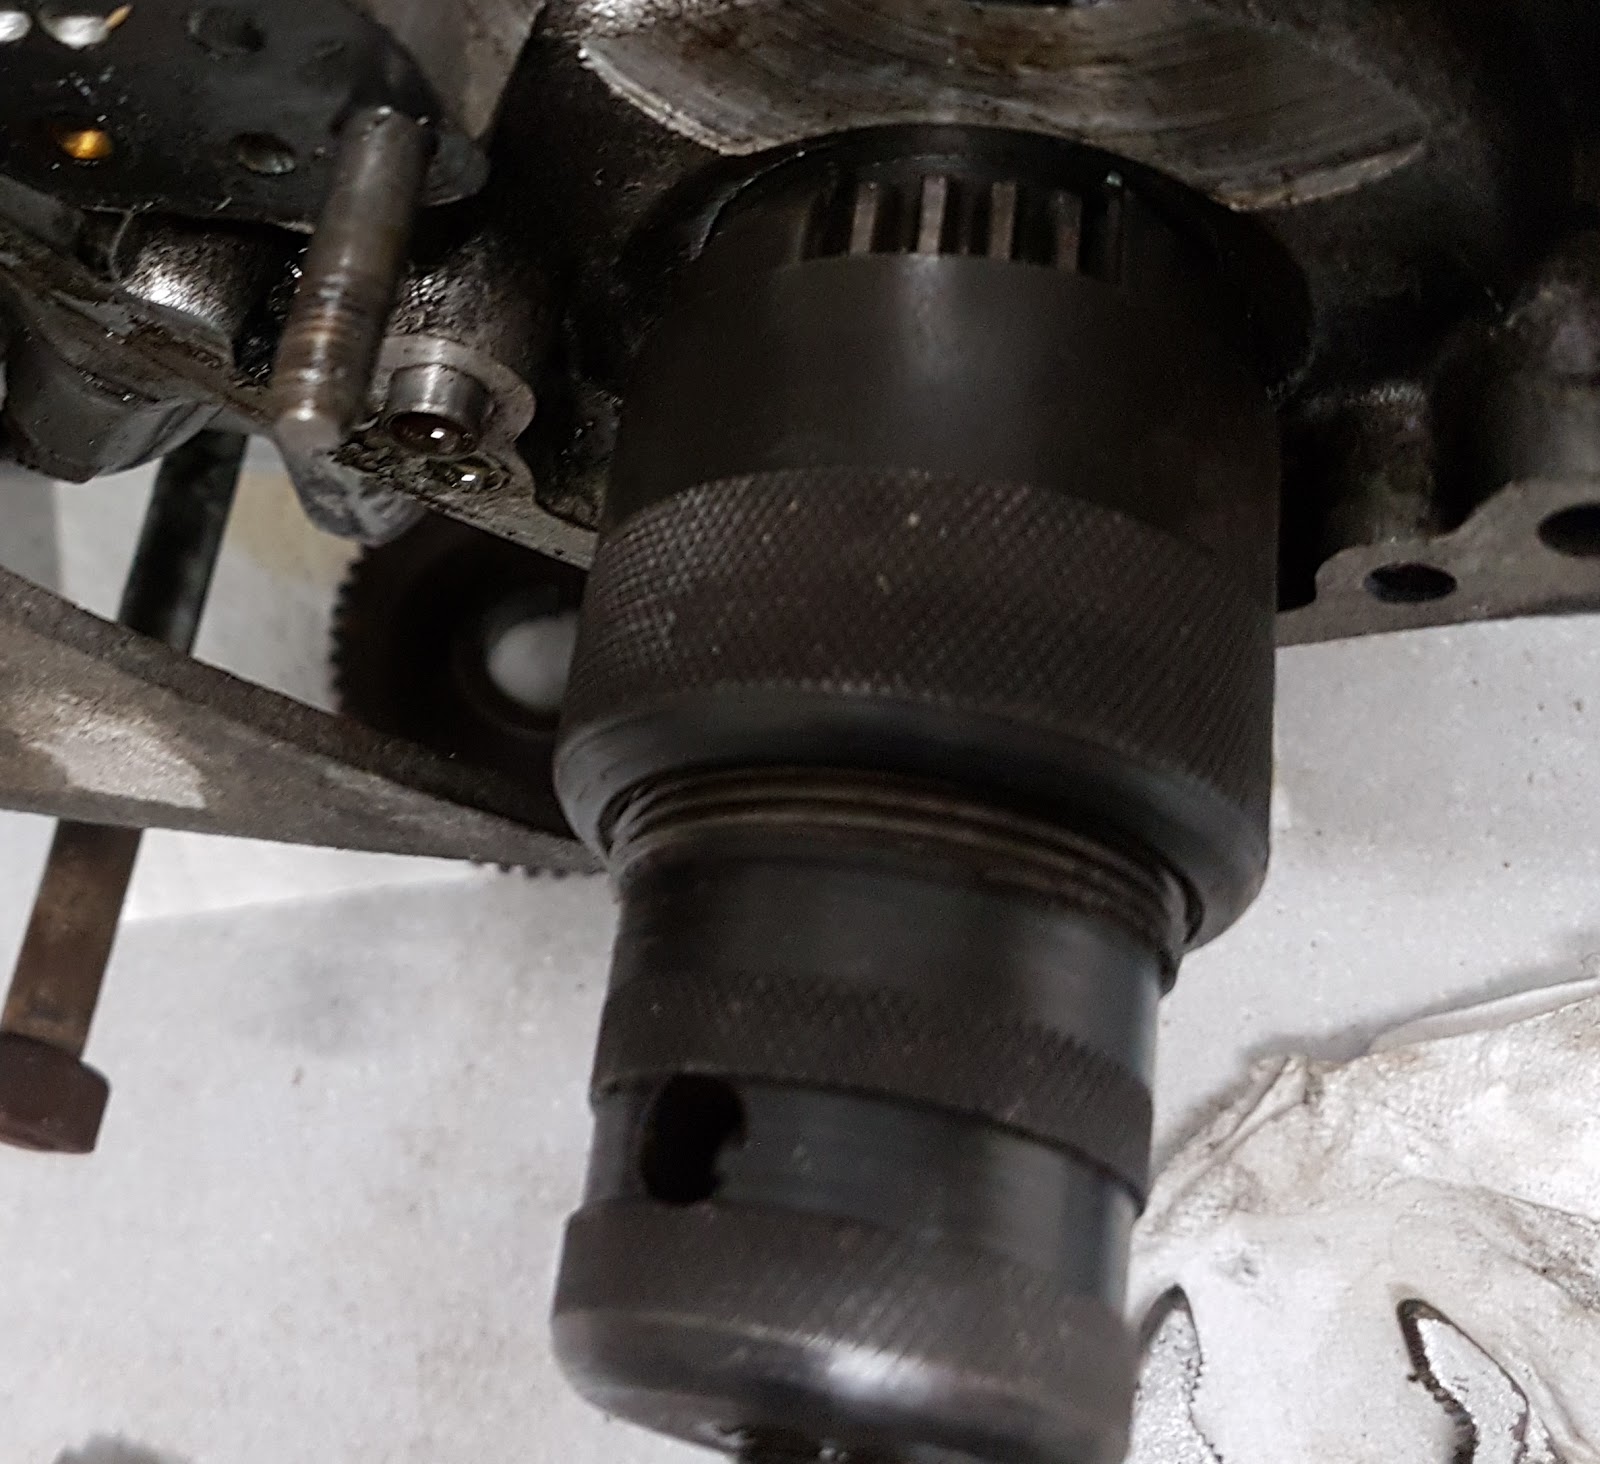 The crankshaft pinion being removed from the Bonneville.